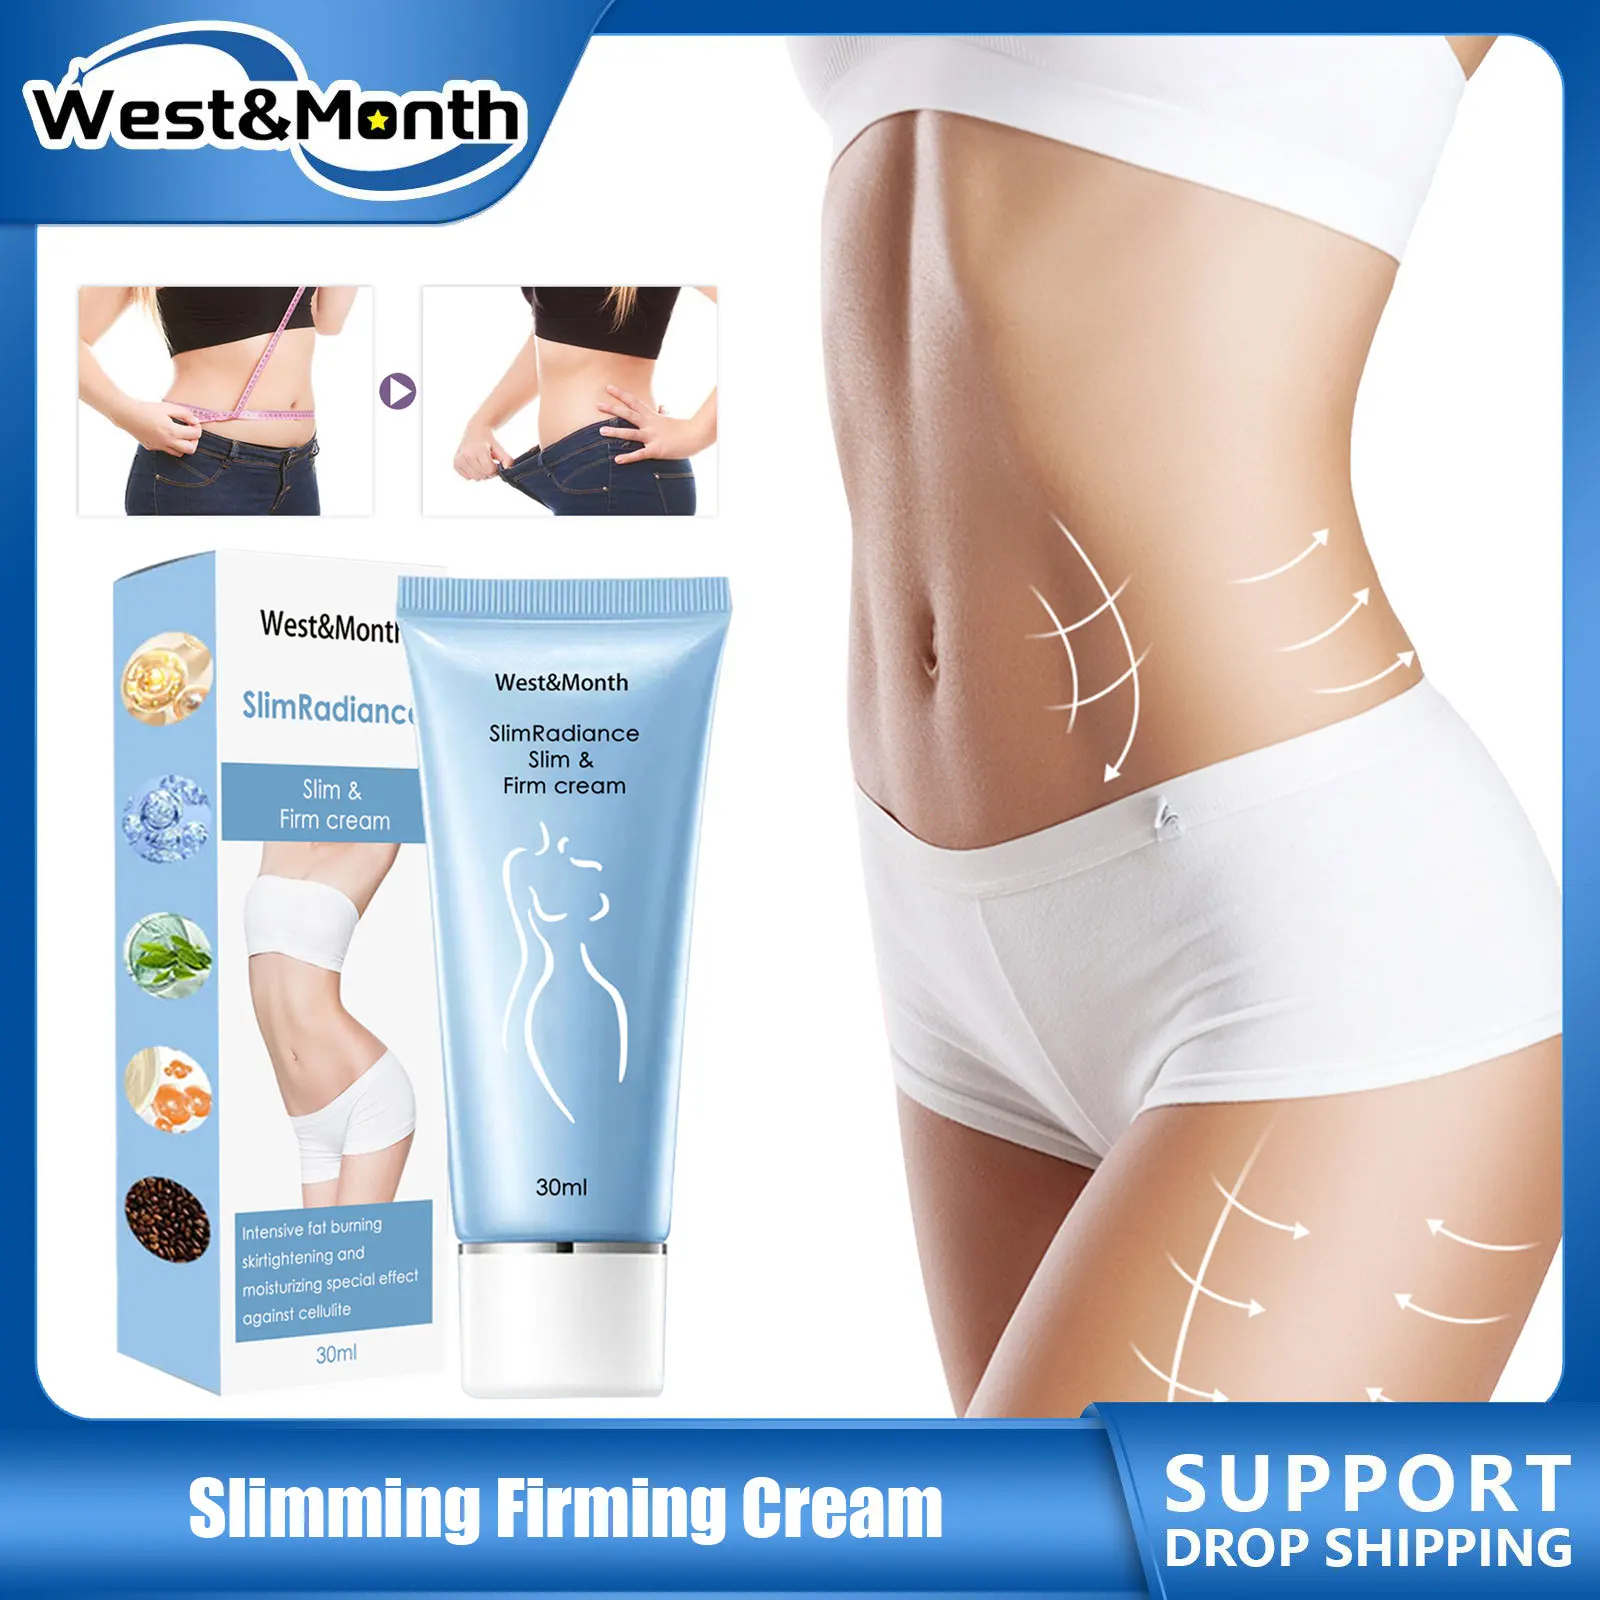 Body Slimming Cream Remove Cellulite Shaping Belly Fat Burner Massage Tightening Firming Improve Sagging Skin Weight Loss Cream fat burning slimming cream belly fat burner for women abdominal body reducer shaper hot gel cellulite remover skin tightening60g